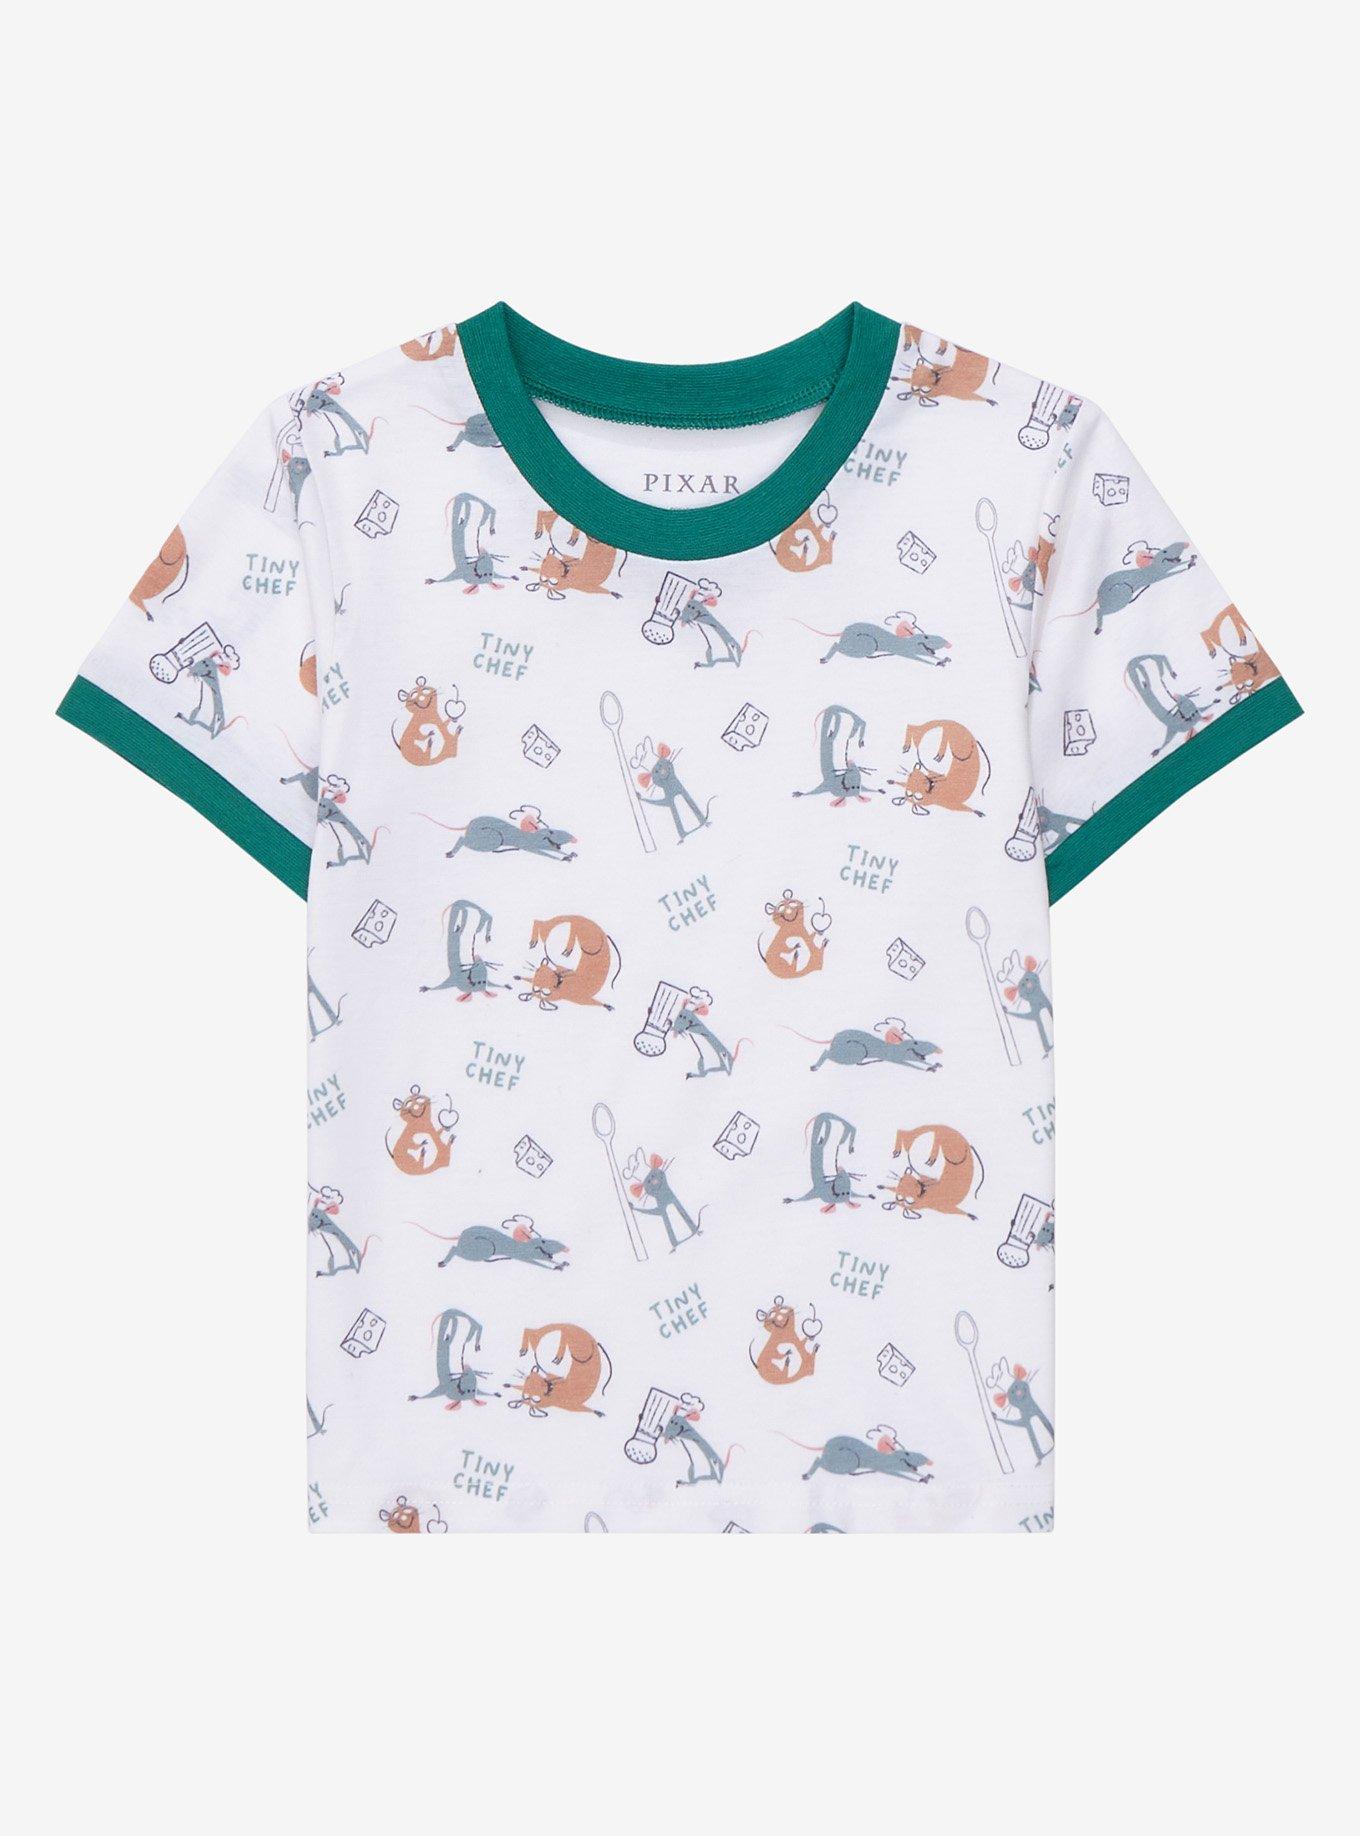 Disney Pixar Ratatouille Remy Tiny Chef Toddler T-Shirt - BoxLunch Exclusive, OFF WHITE, hi-res